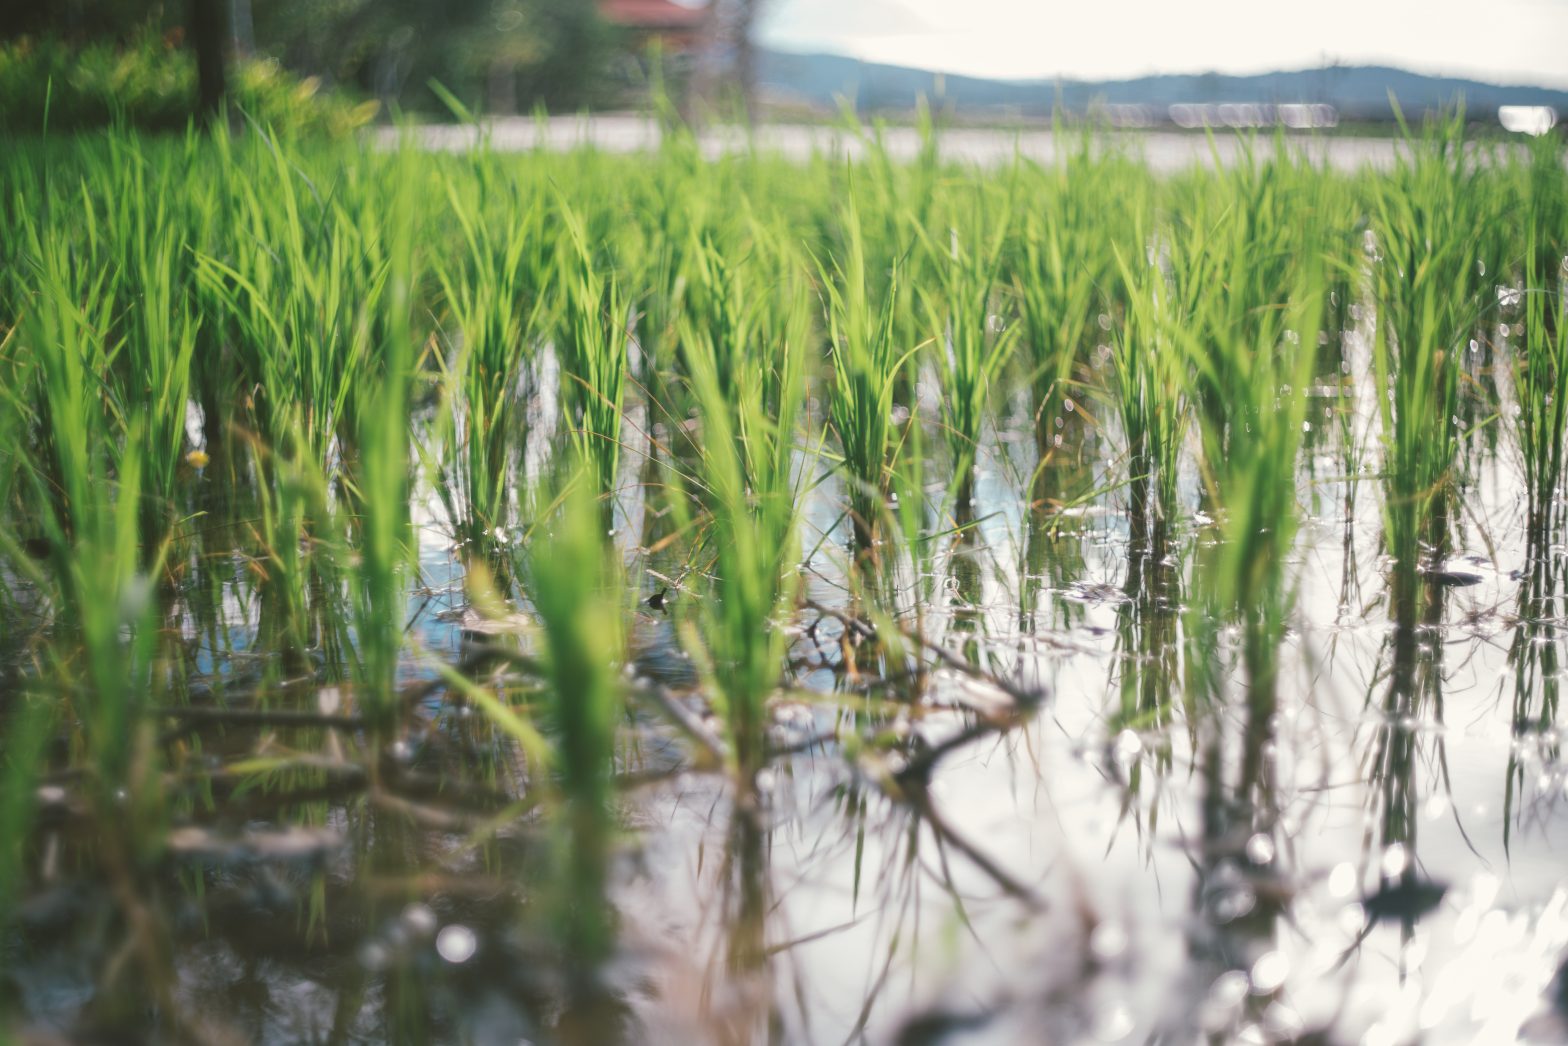 Crop Premium Incentives in New Program to Grow Carbon-Neutral Rice